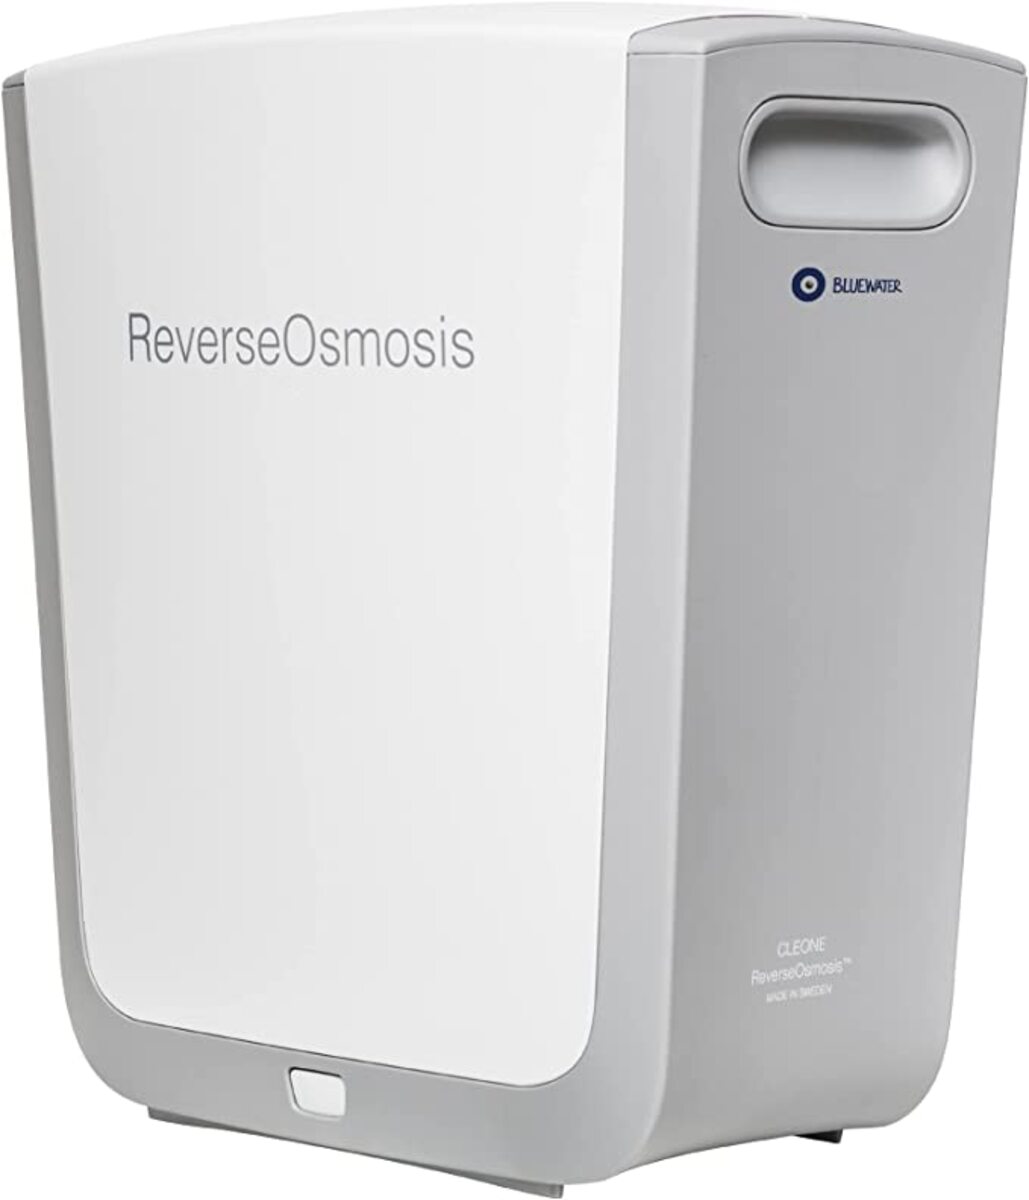 Bluewater CLEONE Water Purifier with RO Technology, White, Cleone Balance